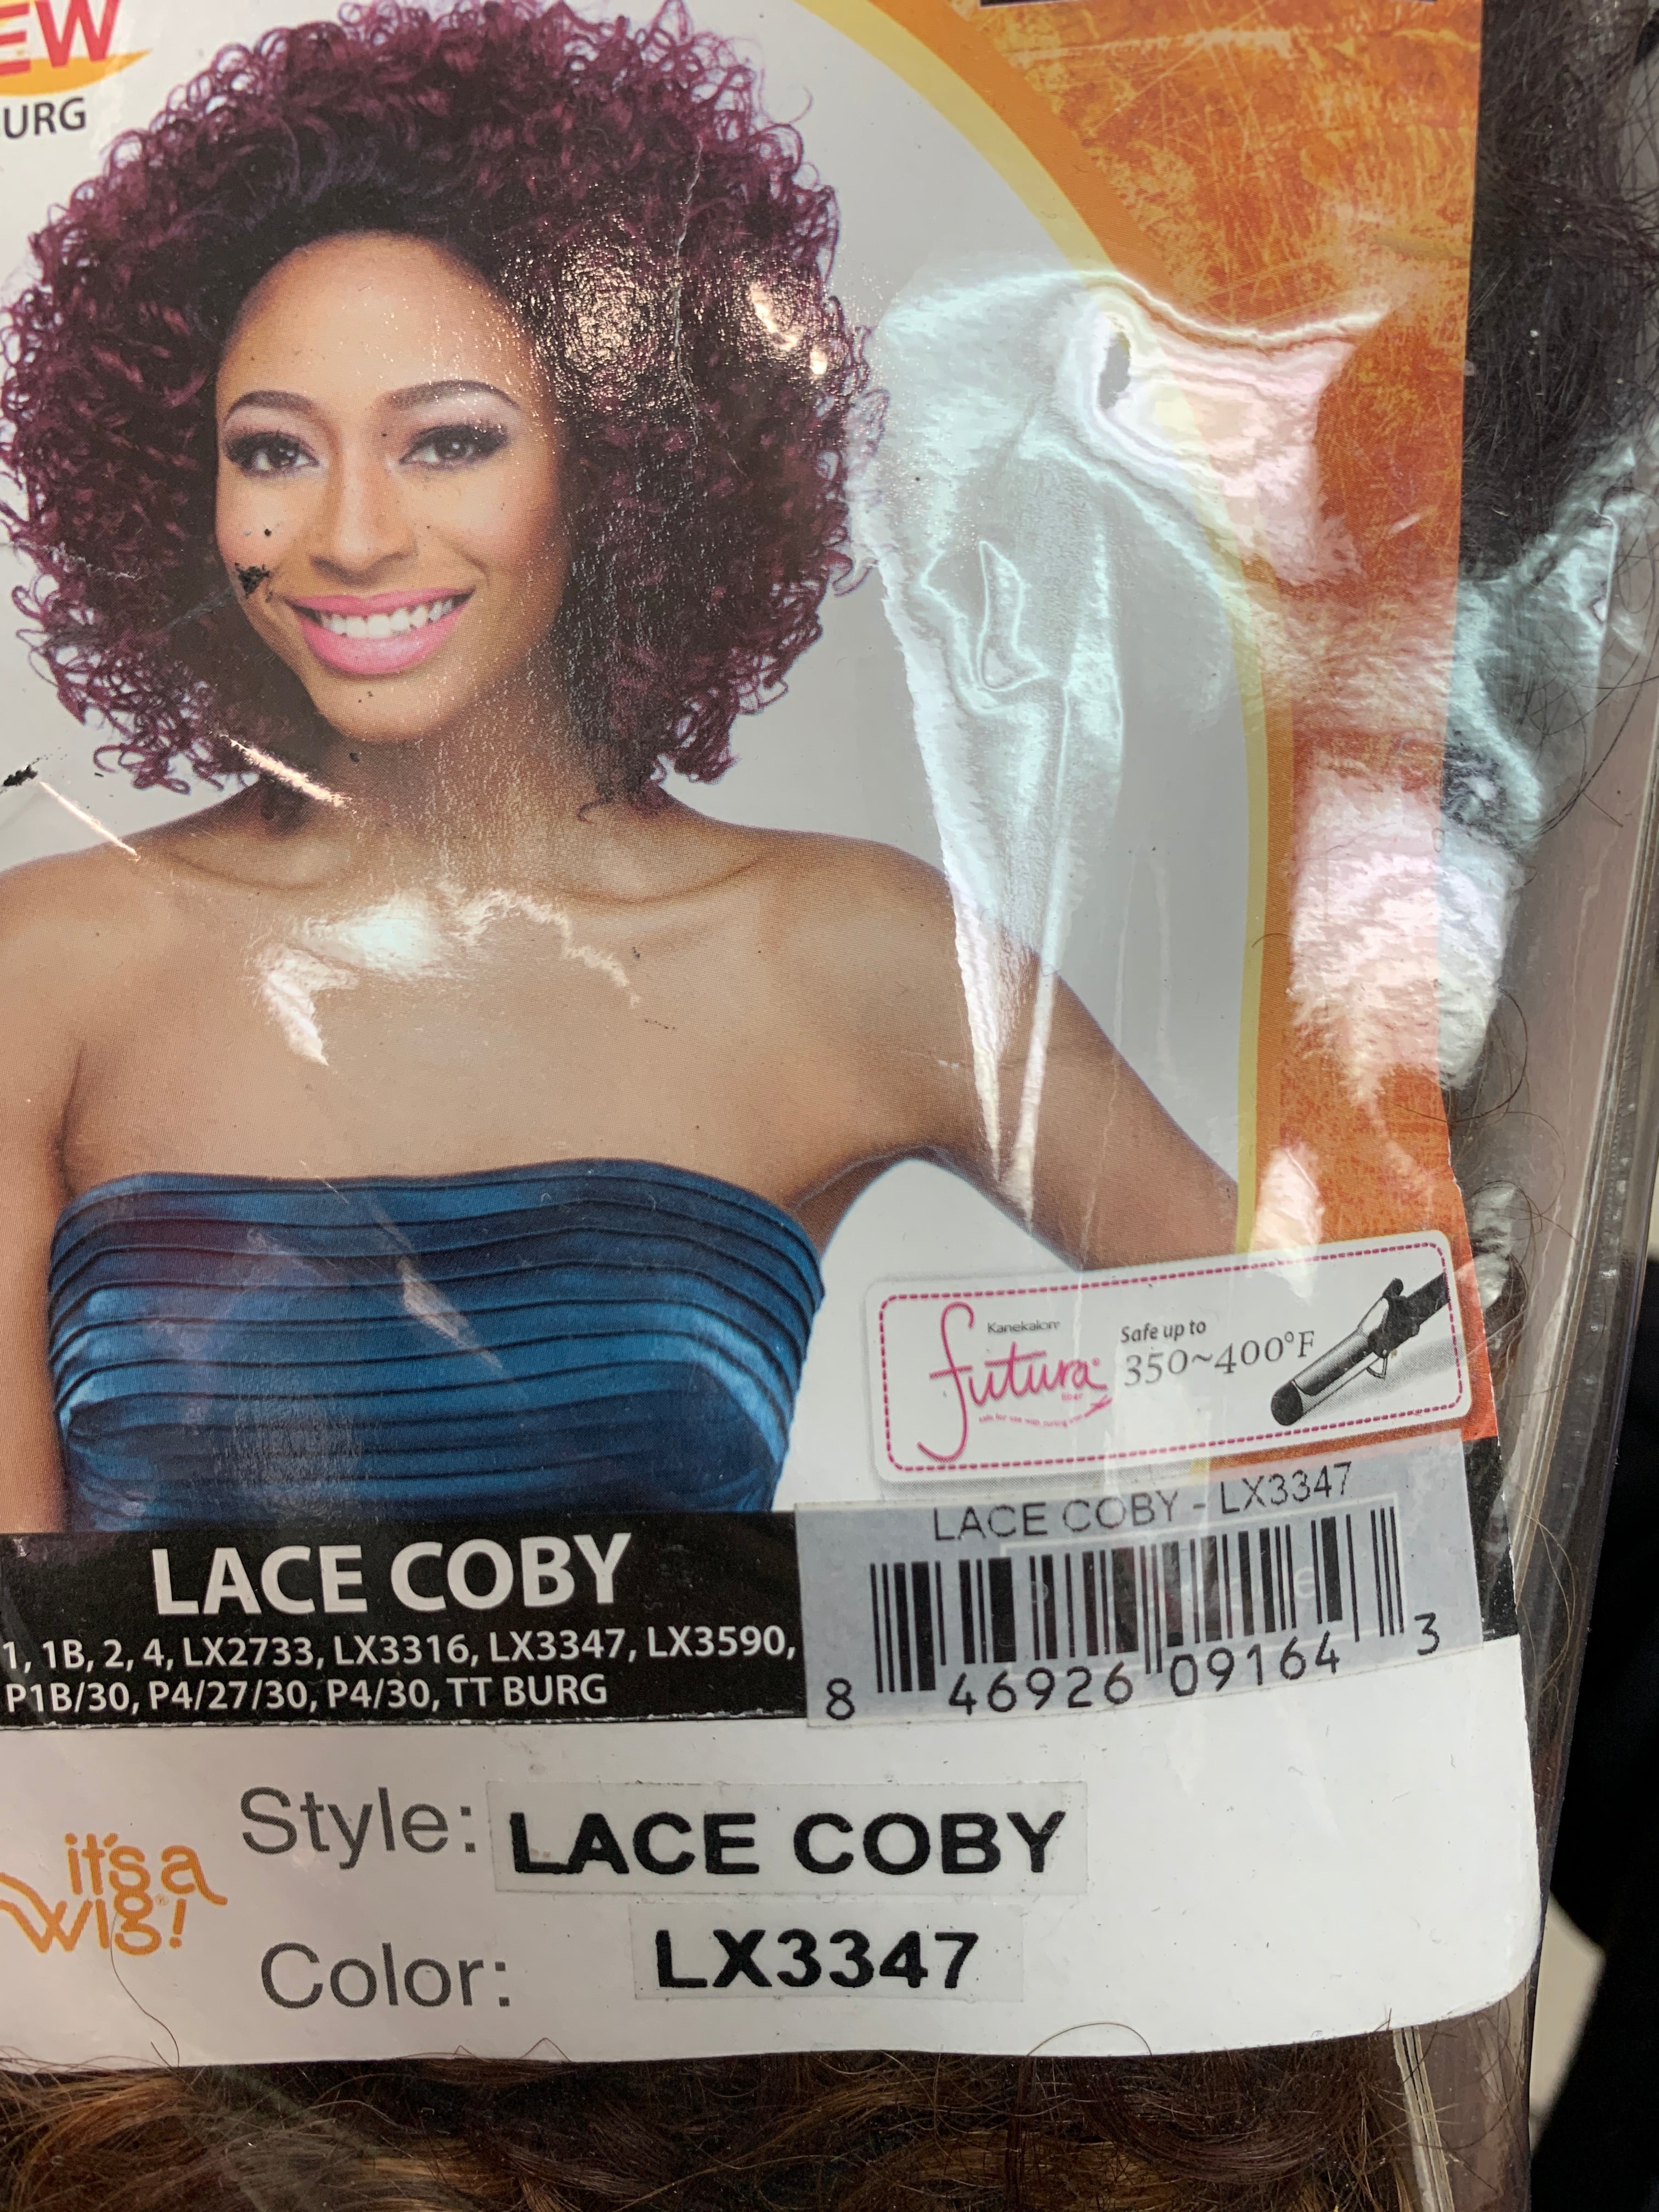 It’s a wig lace coby